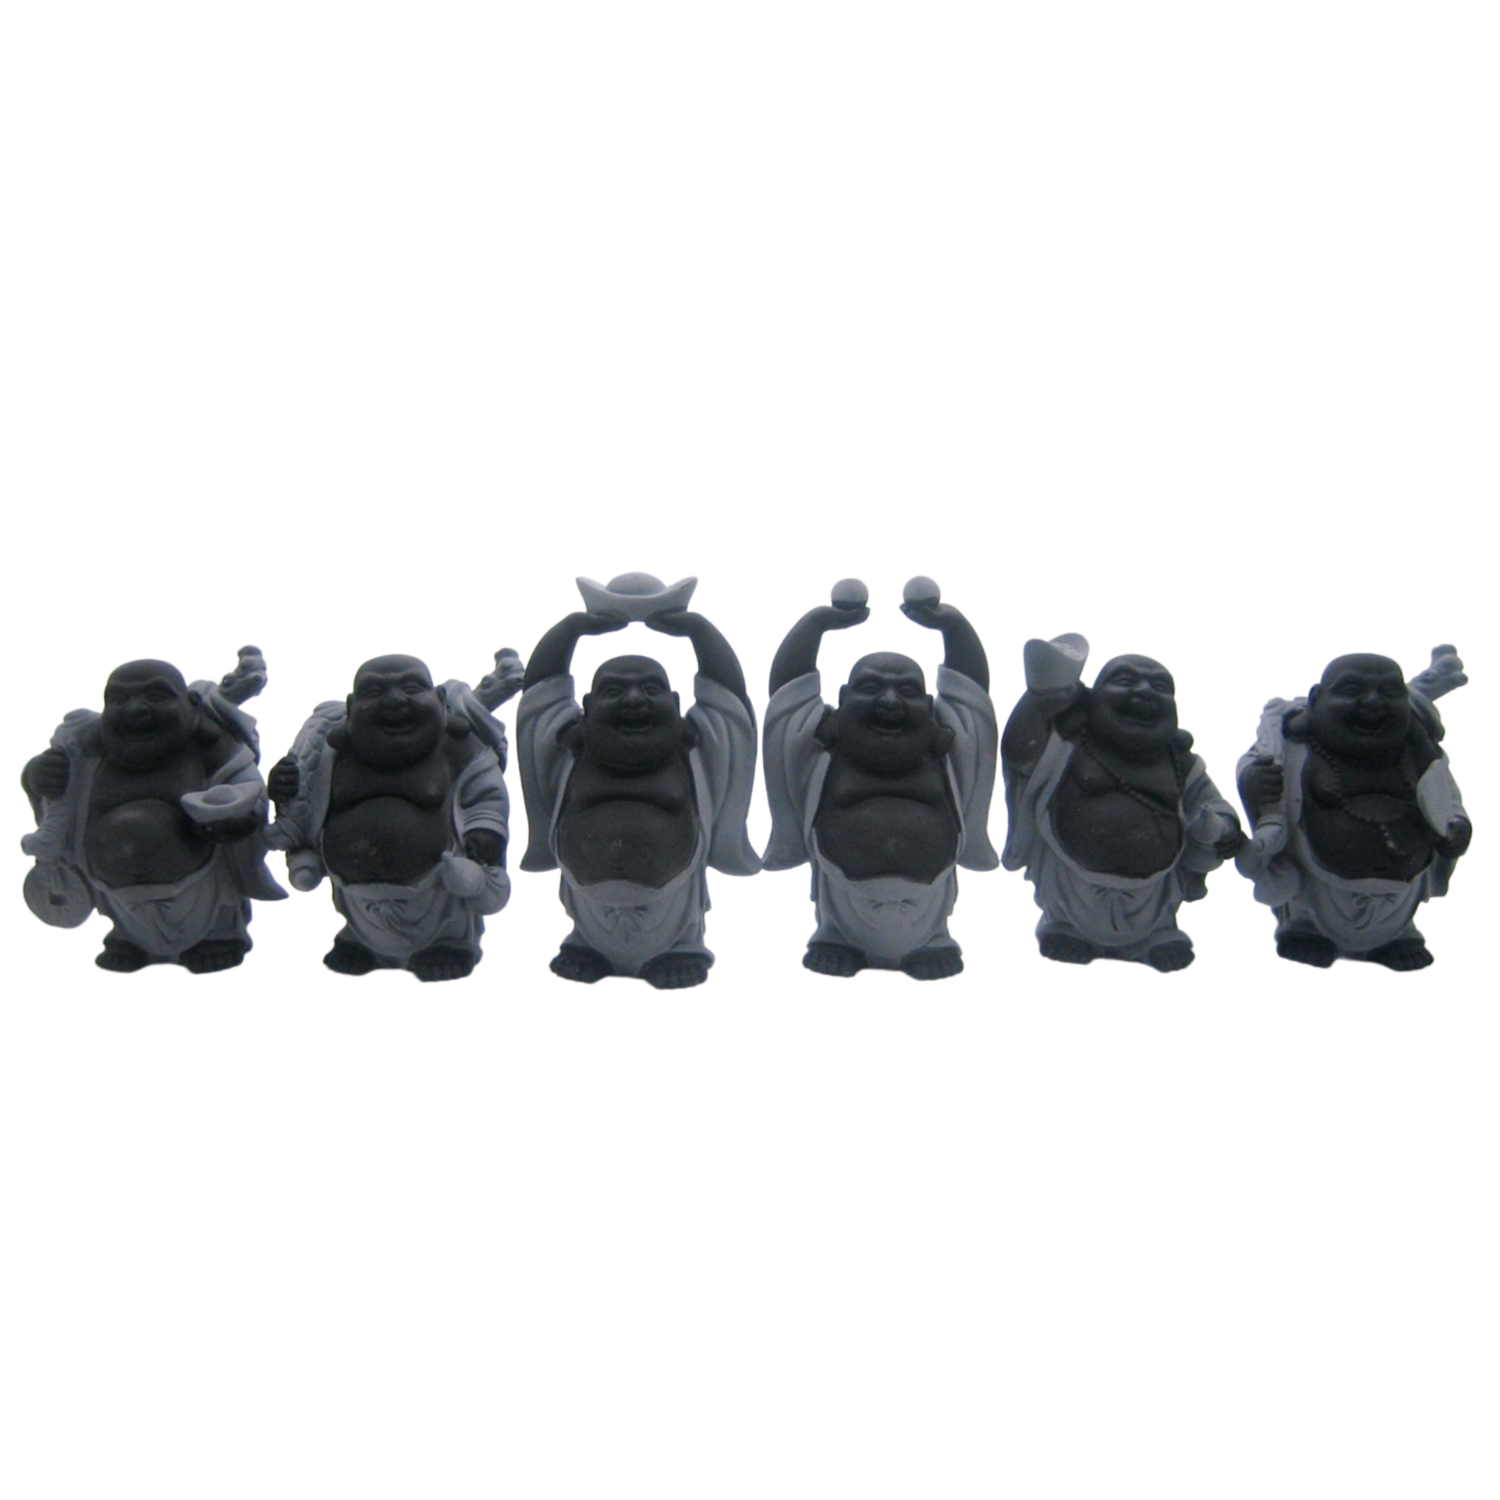 Laughing Buddha 4 Inch Statues (Set of 6 Figurine) Choose Color